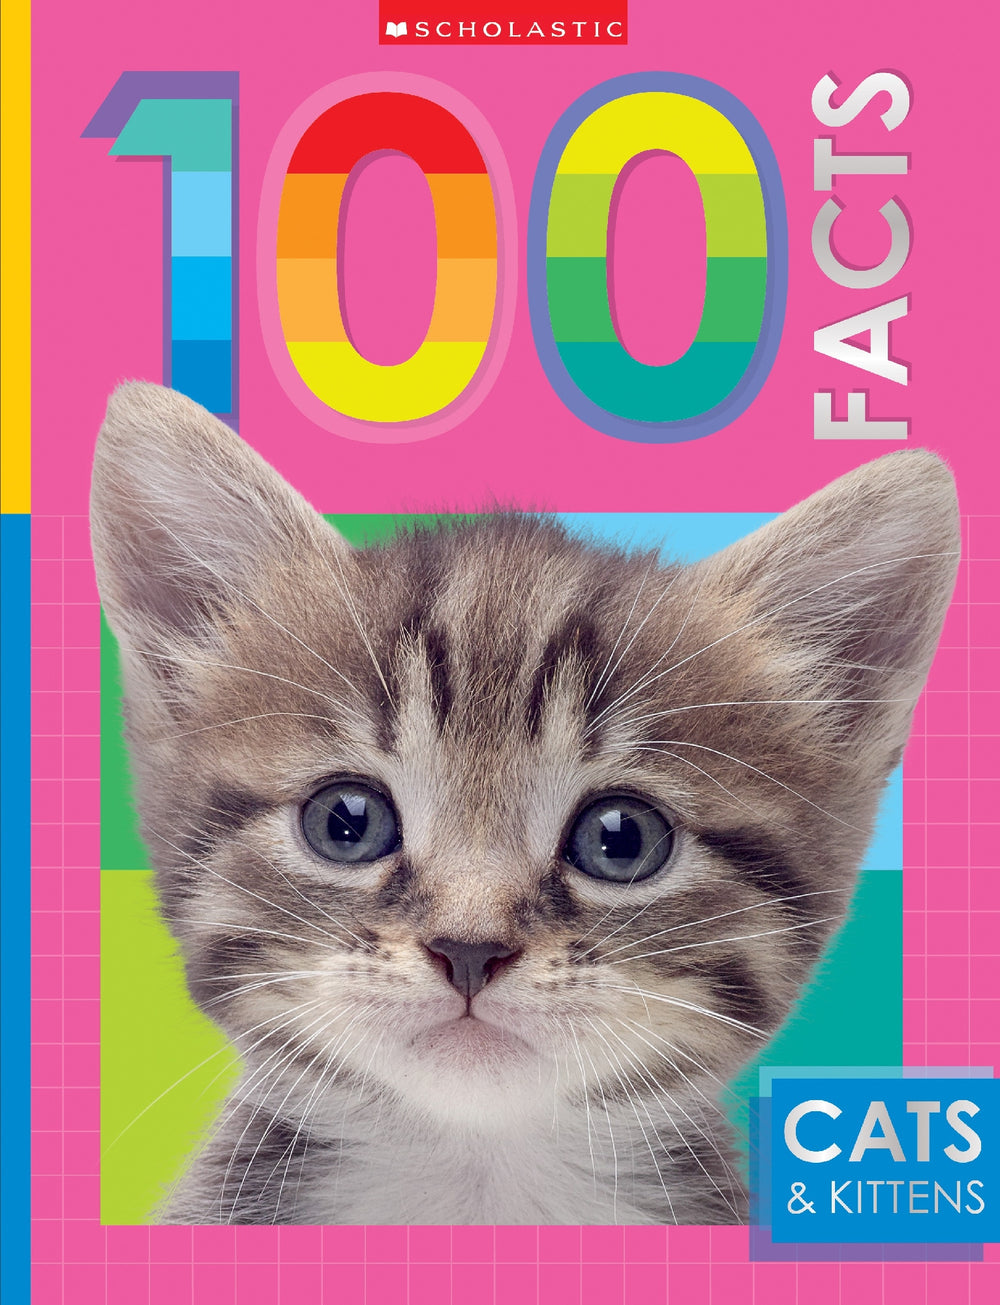 Cats and Kittens: 100 Facts (Miles Kelly)